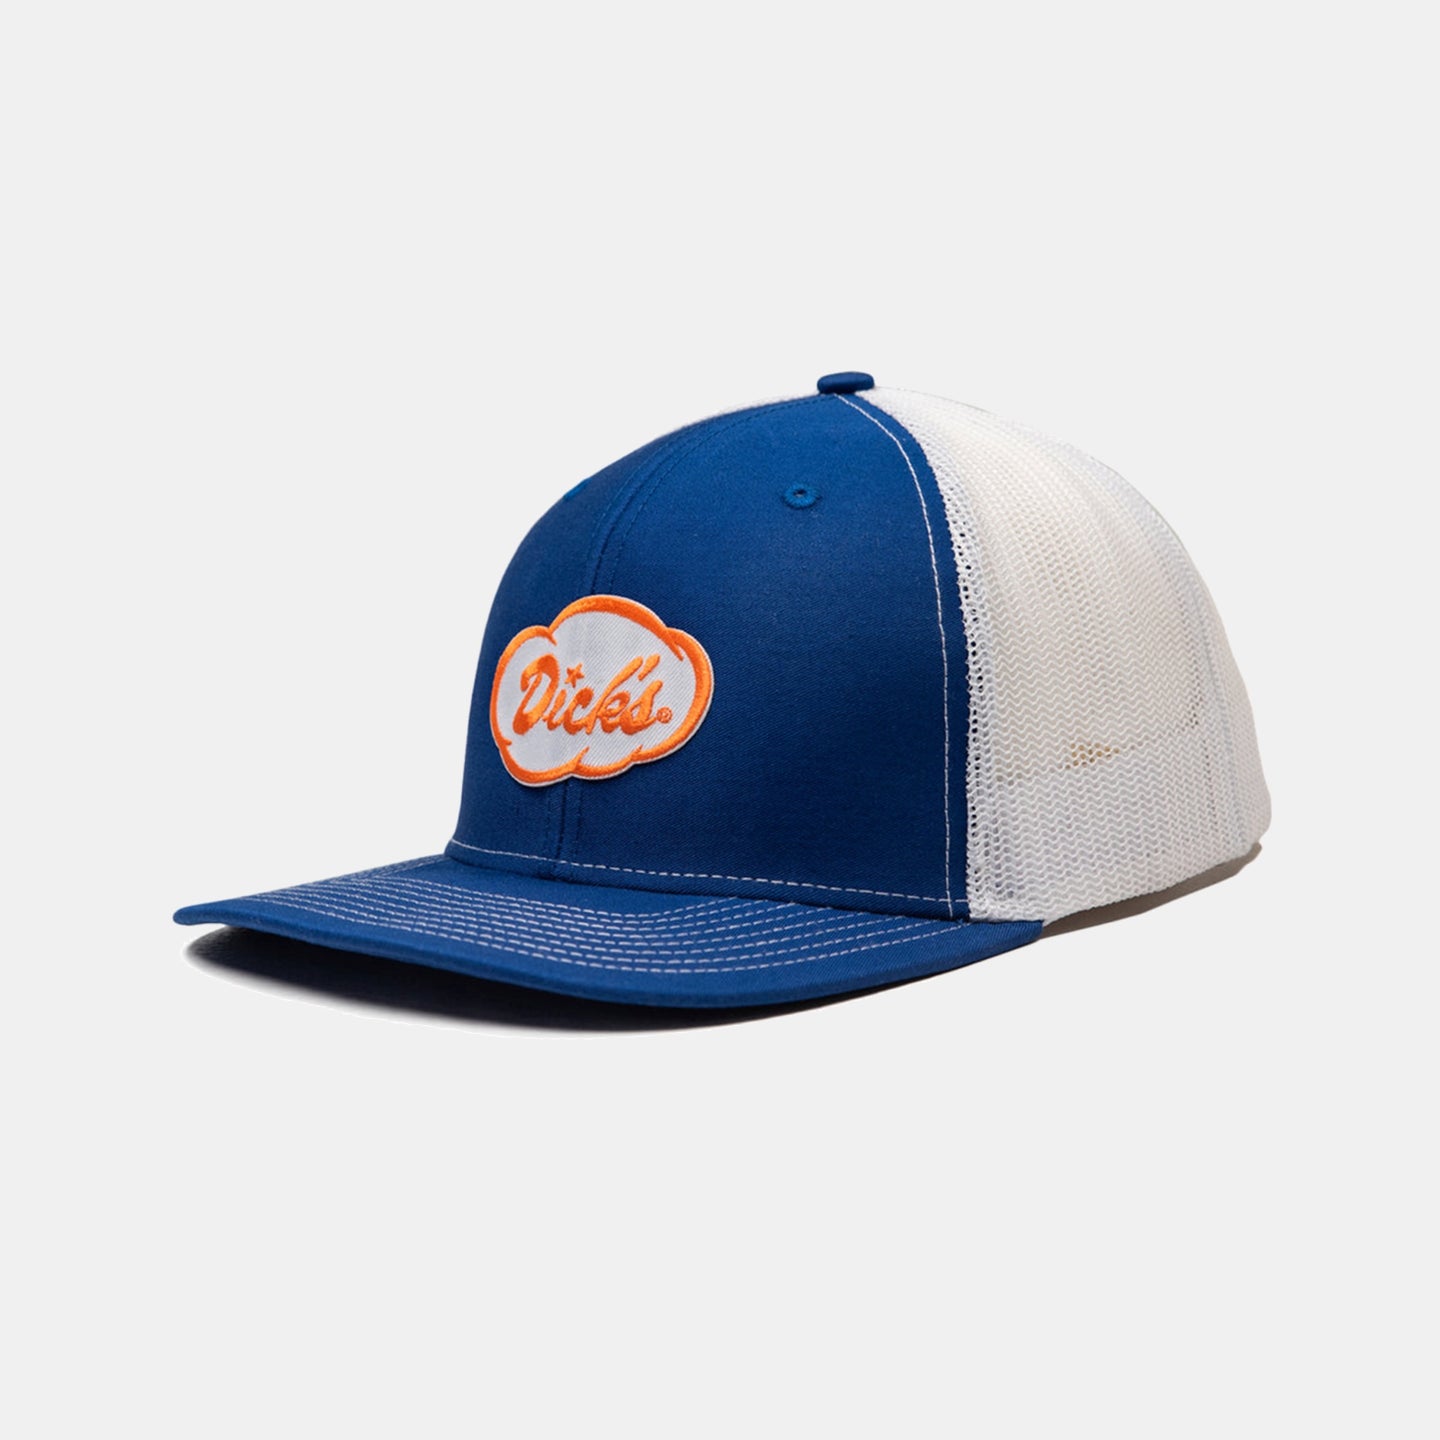 Blue front, white back trucker hat with white stitching. White and orange 